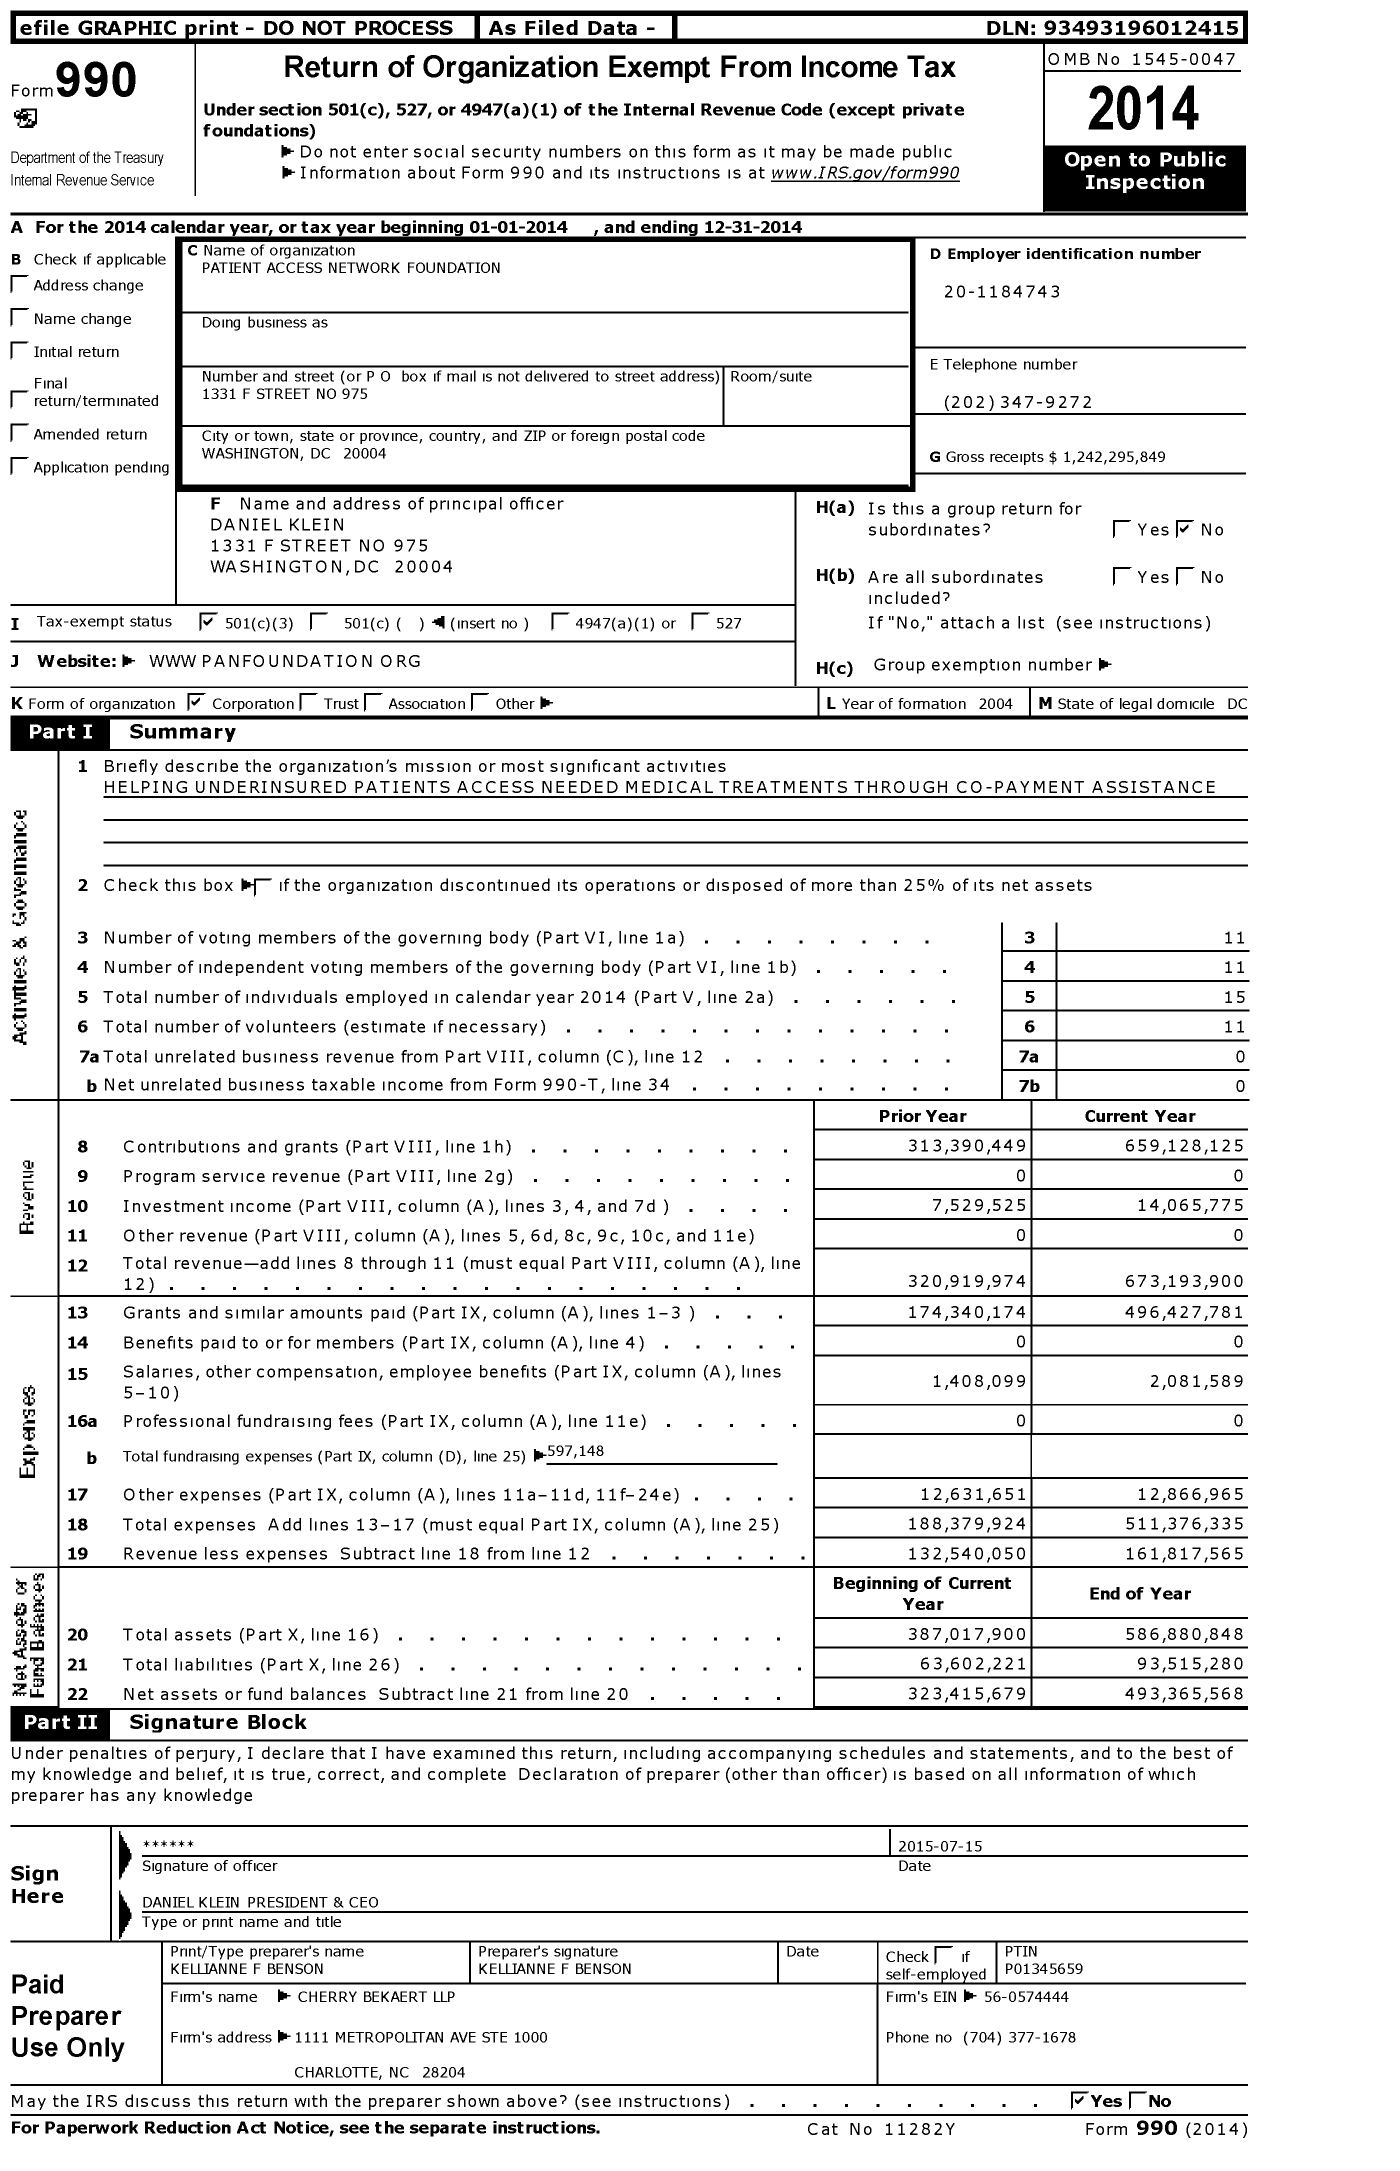 Image of first page of 2014 Form 990 for Patient Access Network Foundation